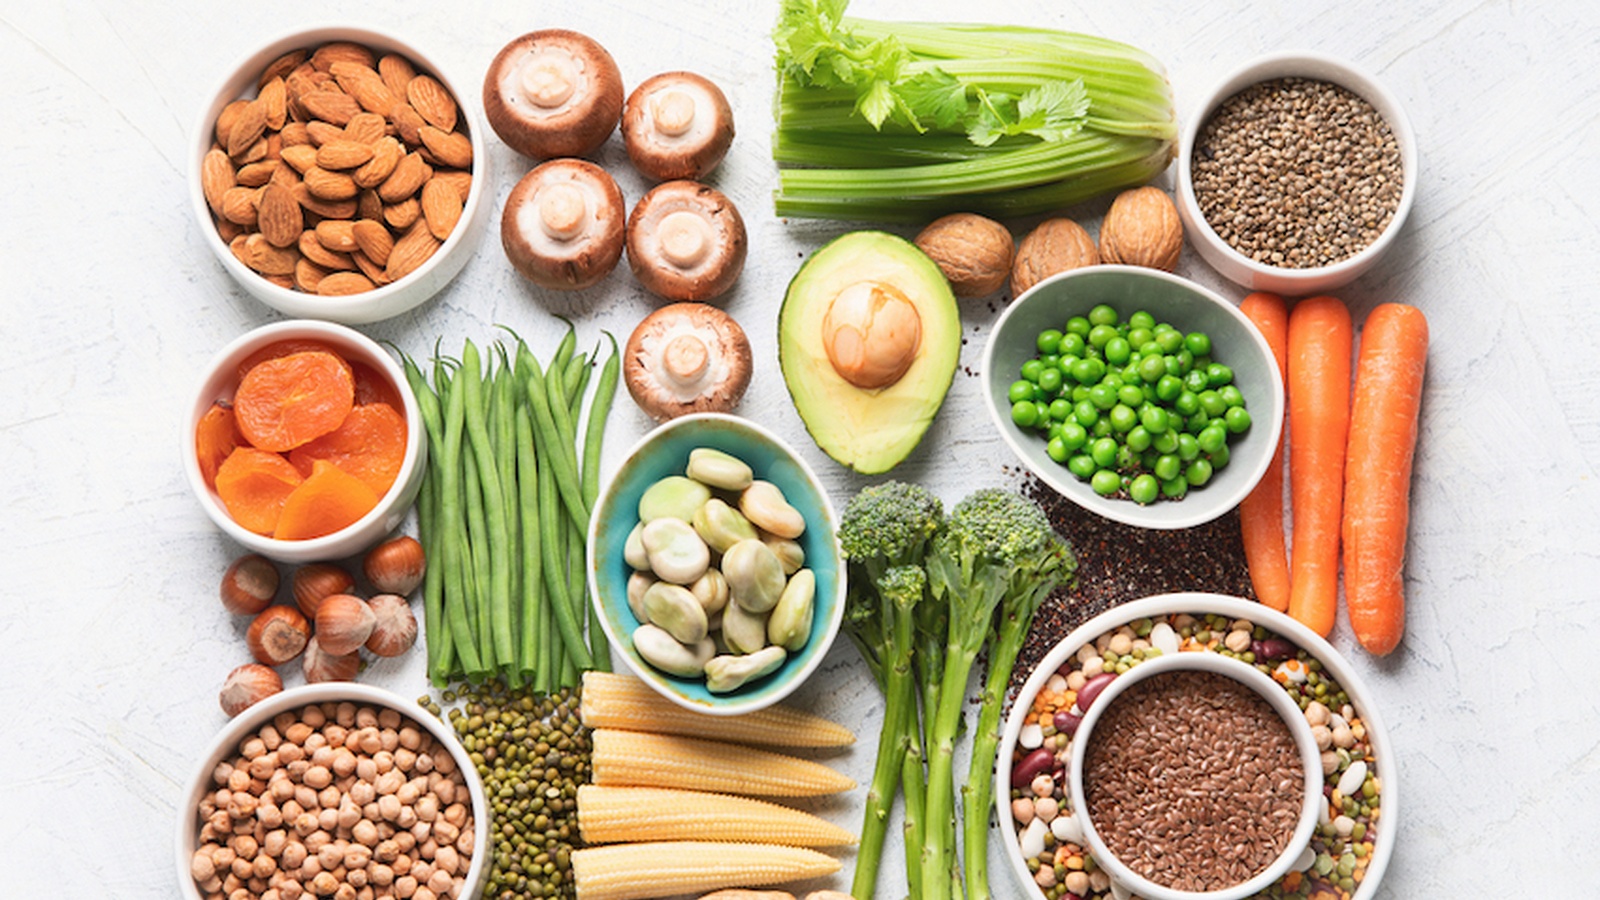 Top 6 Sources of Plant-Based Protein